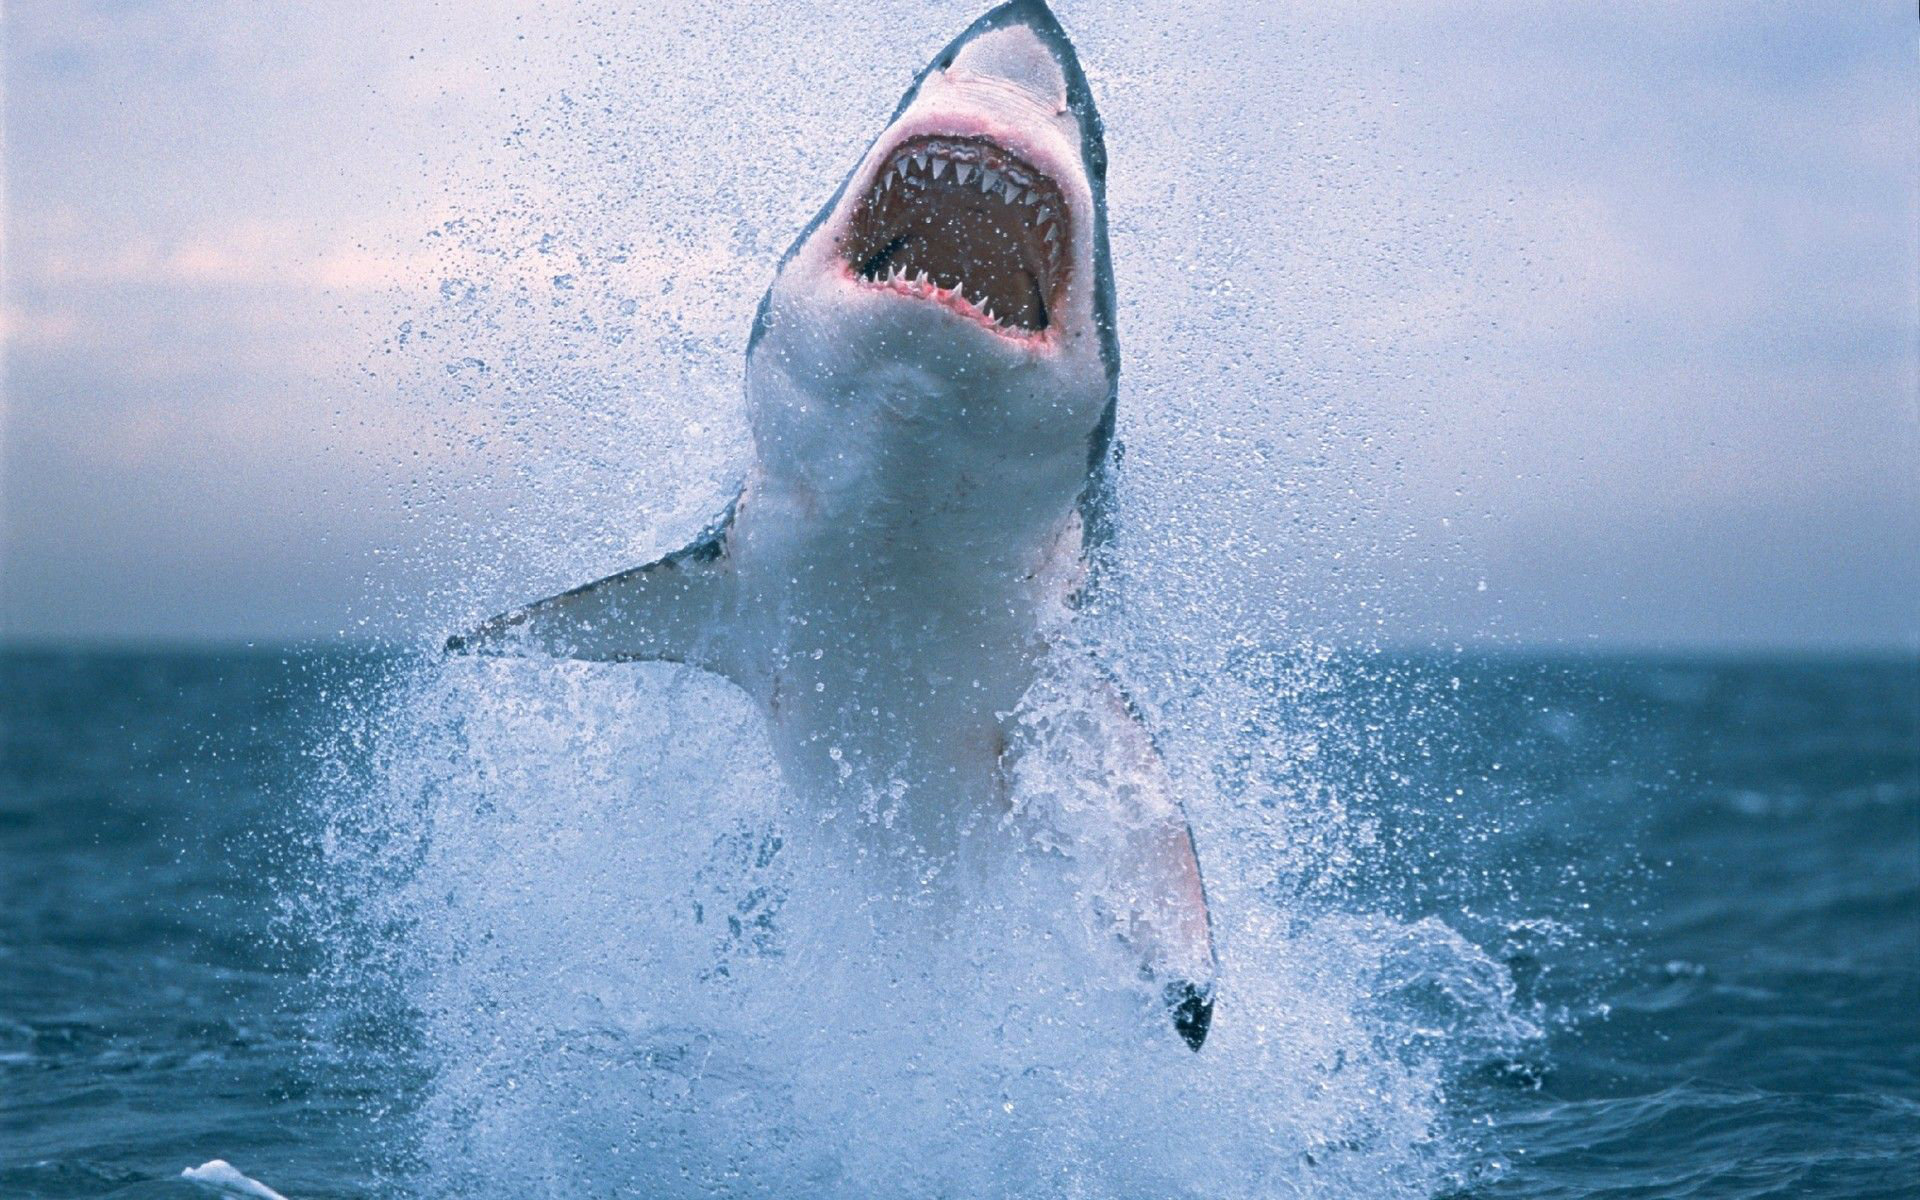 Great White Shark HD Wallpaper Pictures Image